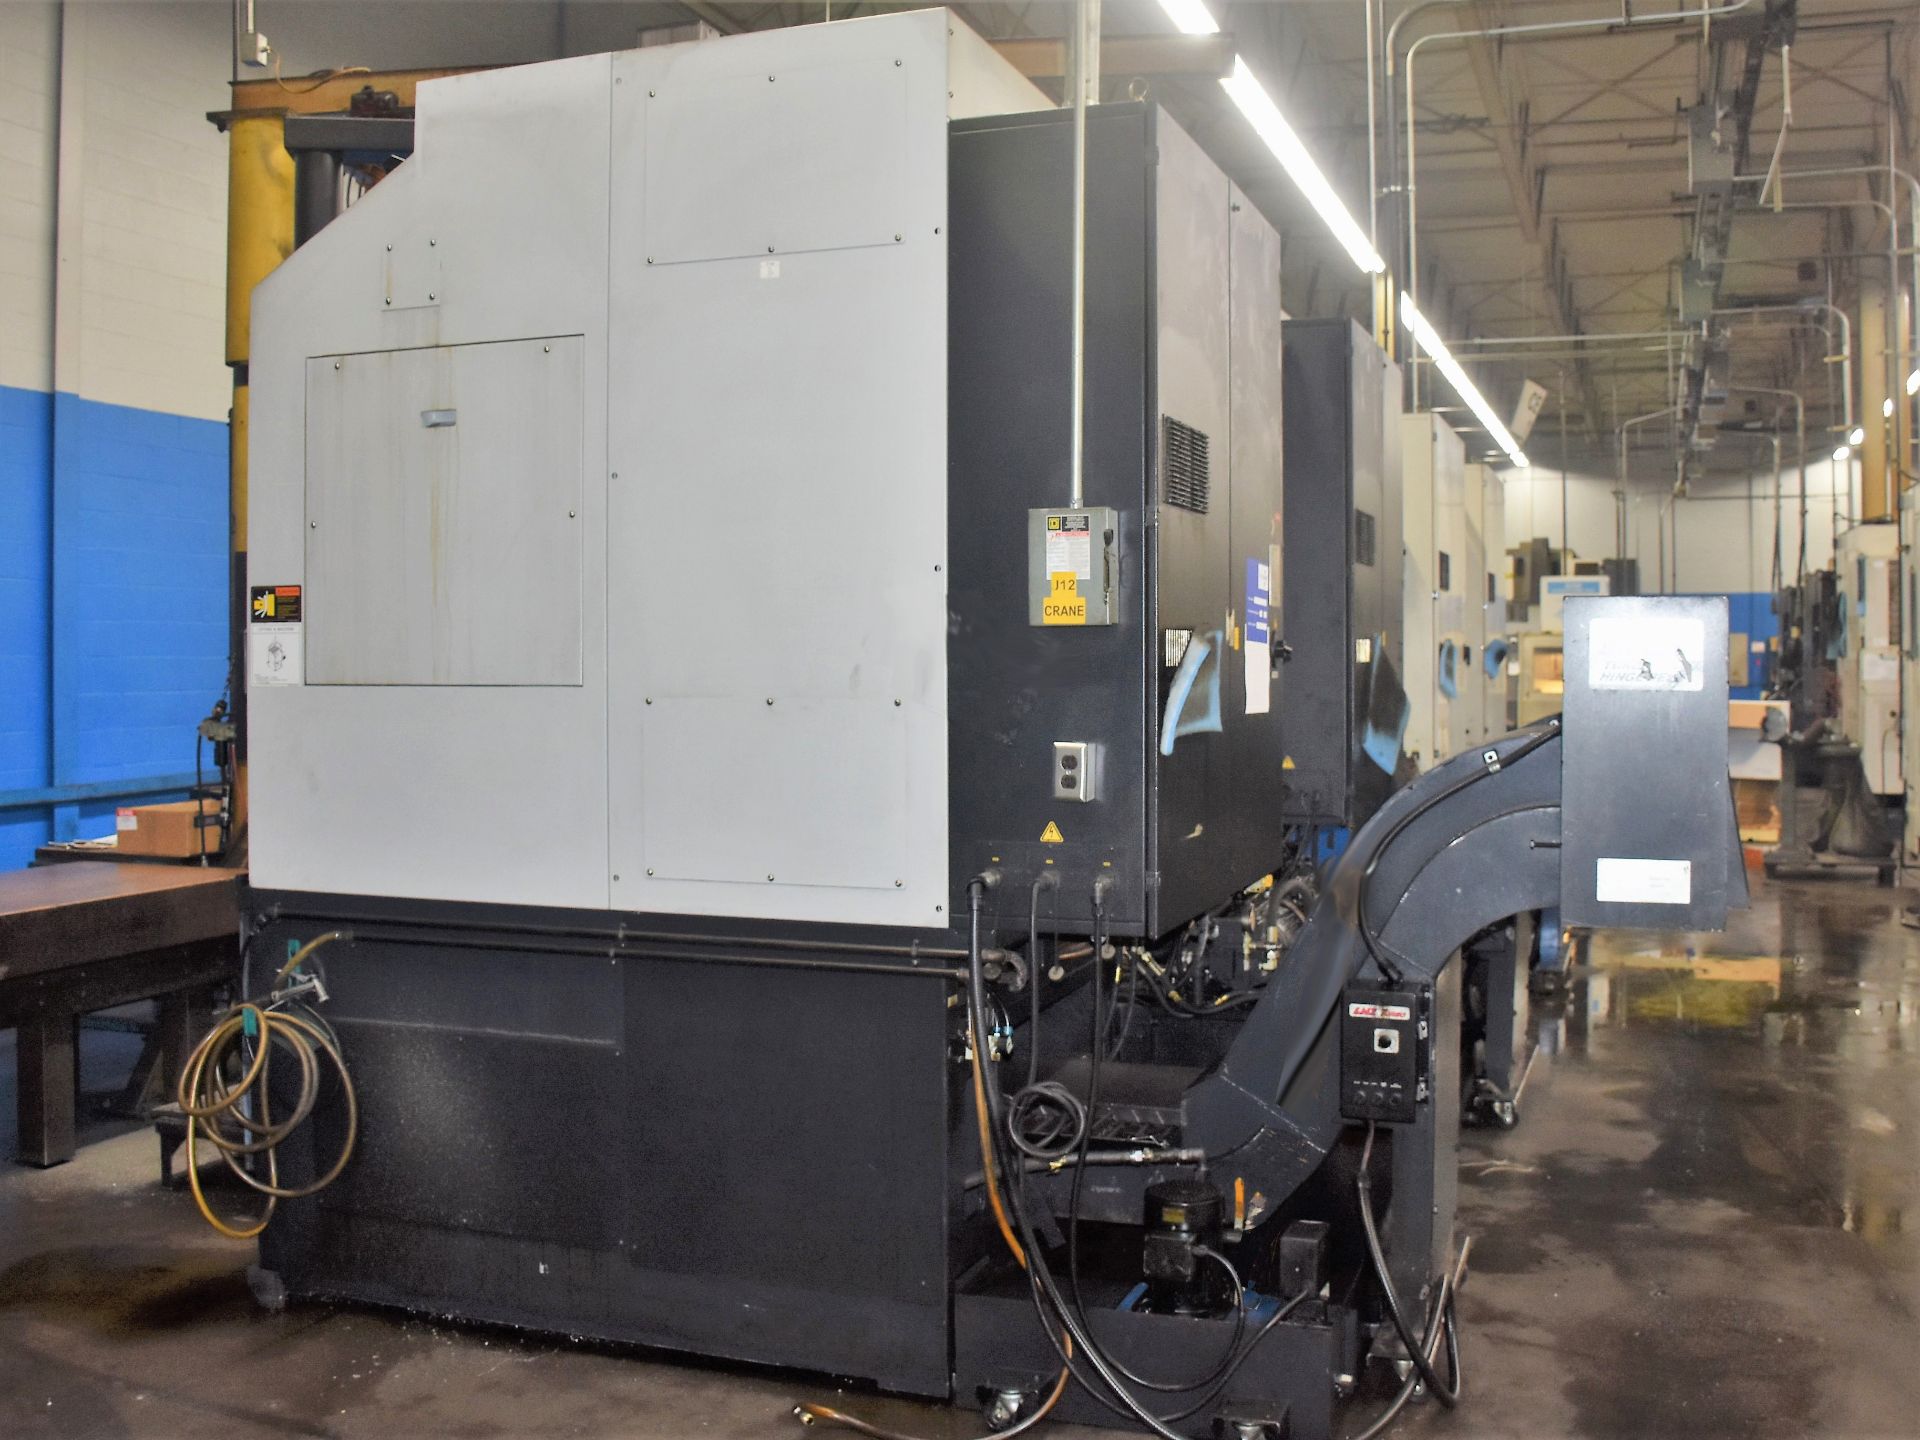 DOOSAN PUMA V550-2SP TWIN SPINDLE CNC VERTICAL TURNING CENTER, WITH FANUC SERIES 18i-TB CNC CONTROLS - Image 2 of 10